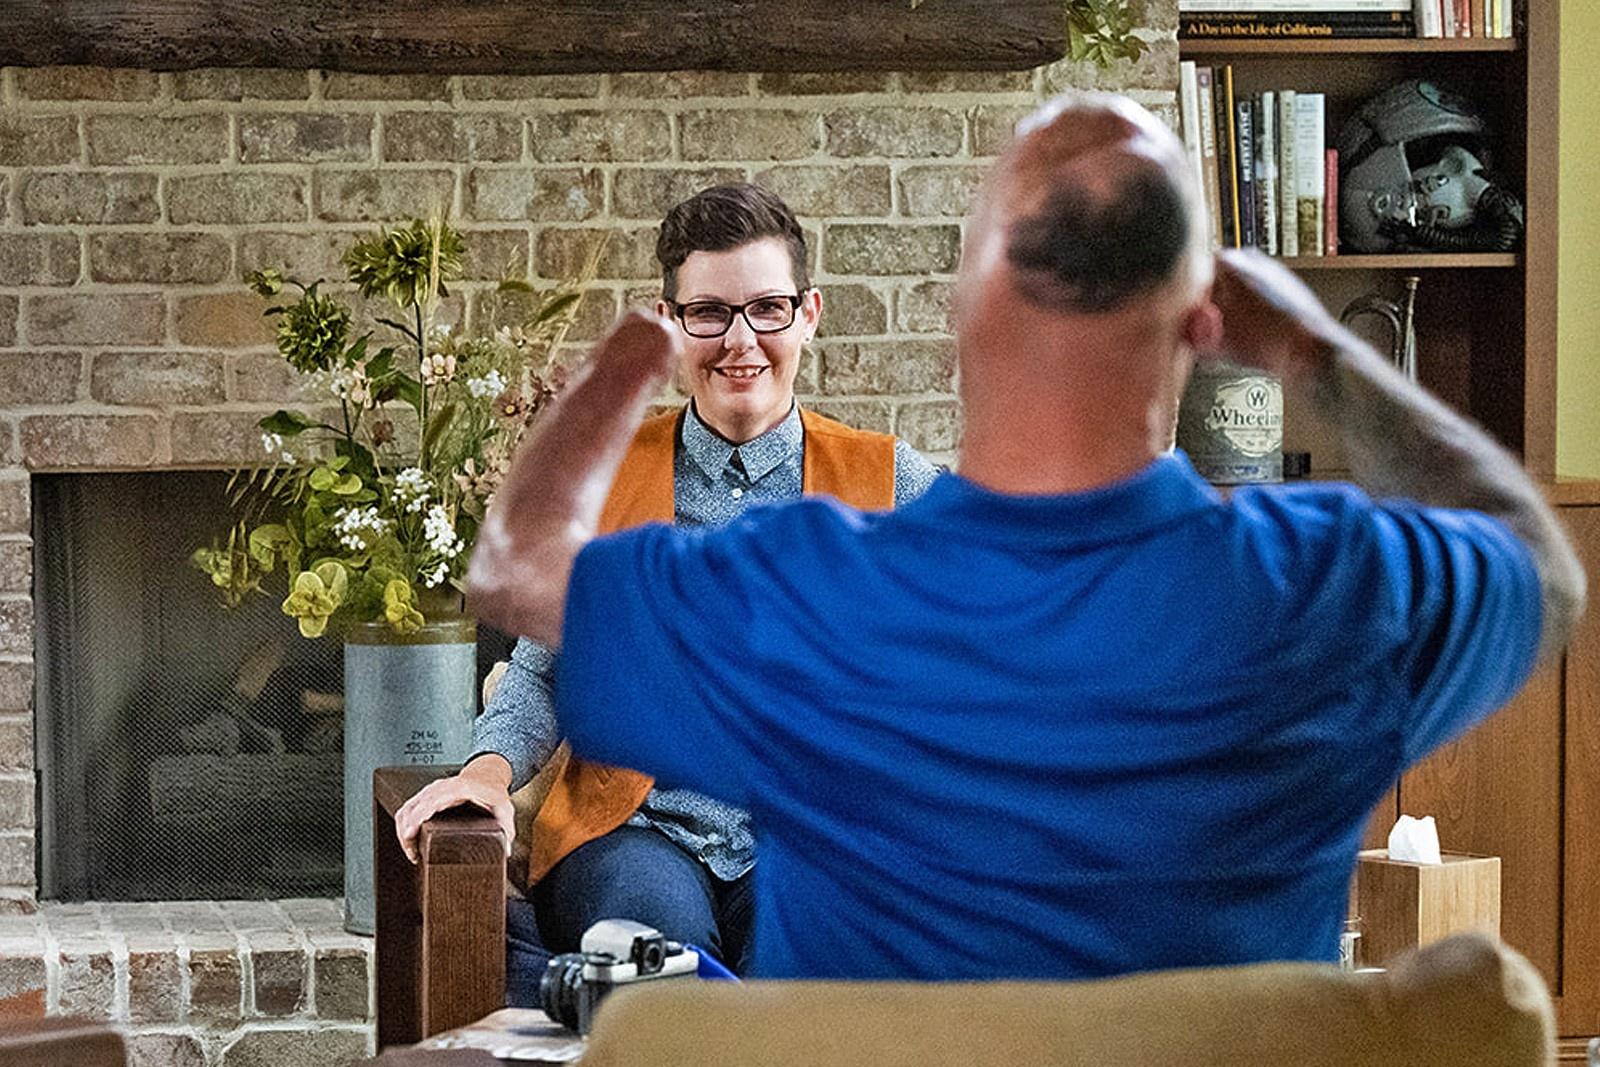 Army Veteran Bobby Henline making host Stacy Pearsall laugh on set of “After Action.”